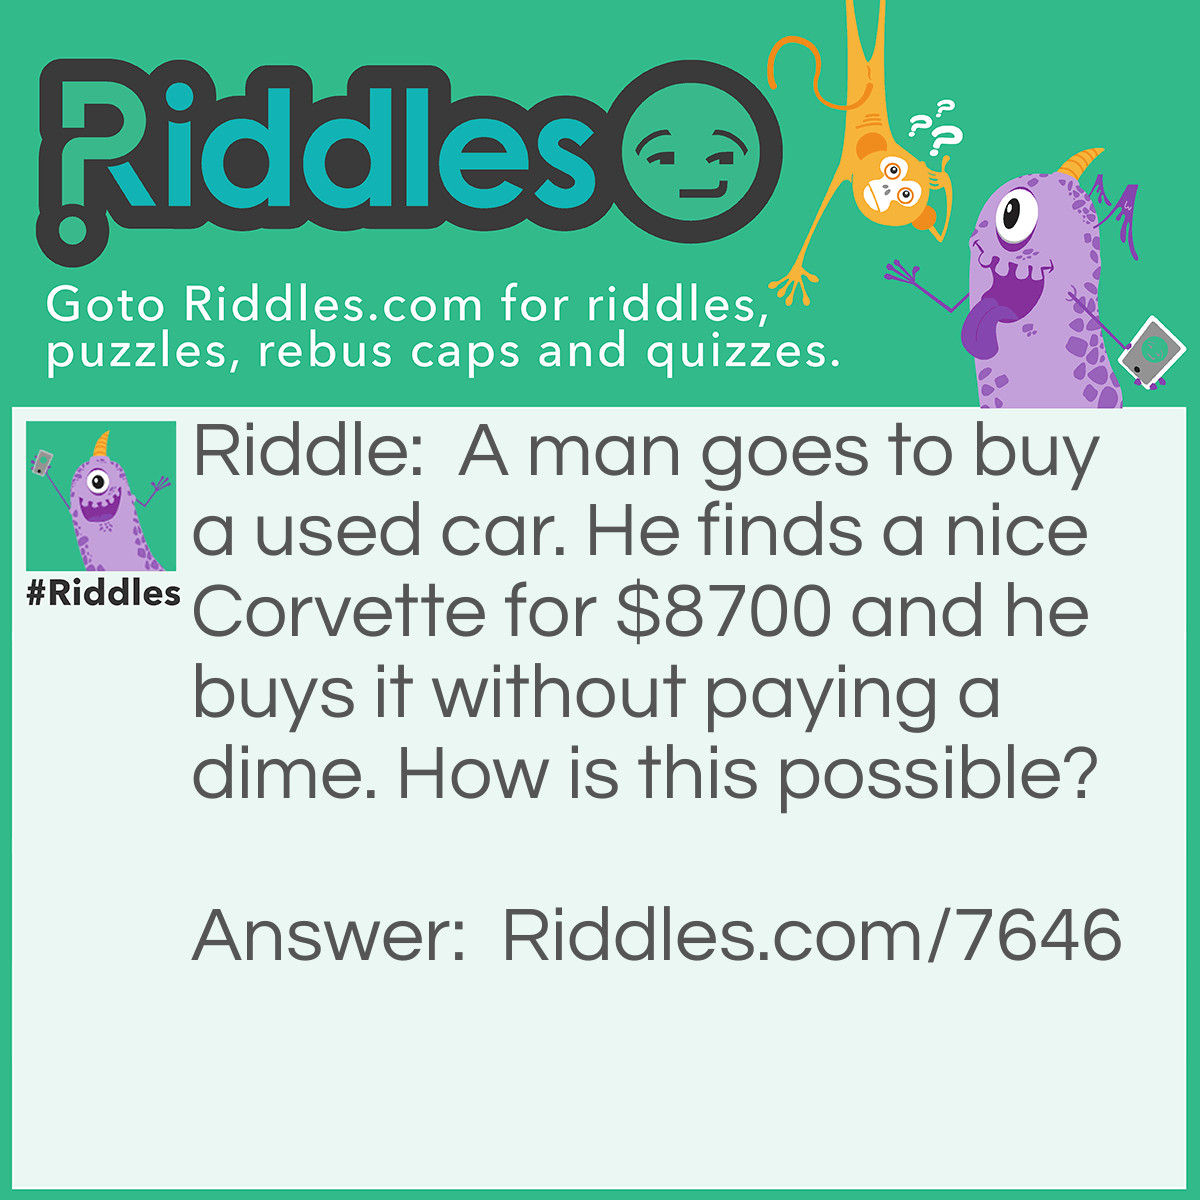 Riddle: A man goes to buy a used car. He finds a nice Corvette for $8700 and he buys it without paying a dime. How is this possible? Answer: He didn’t pay a dime, he payed $8700.